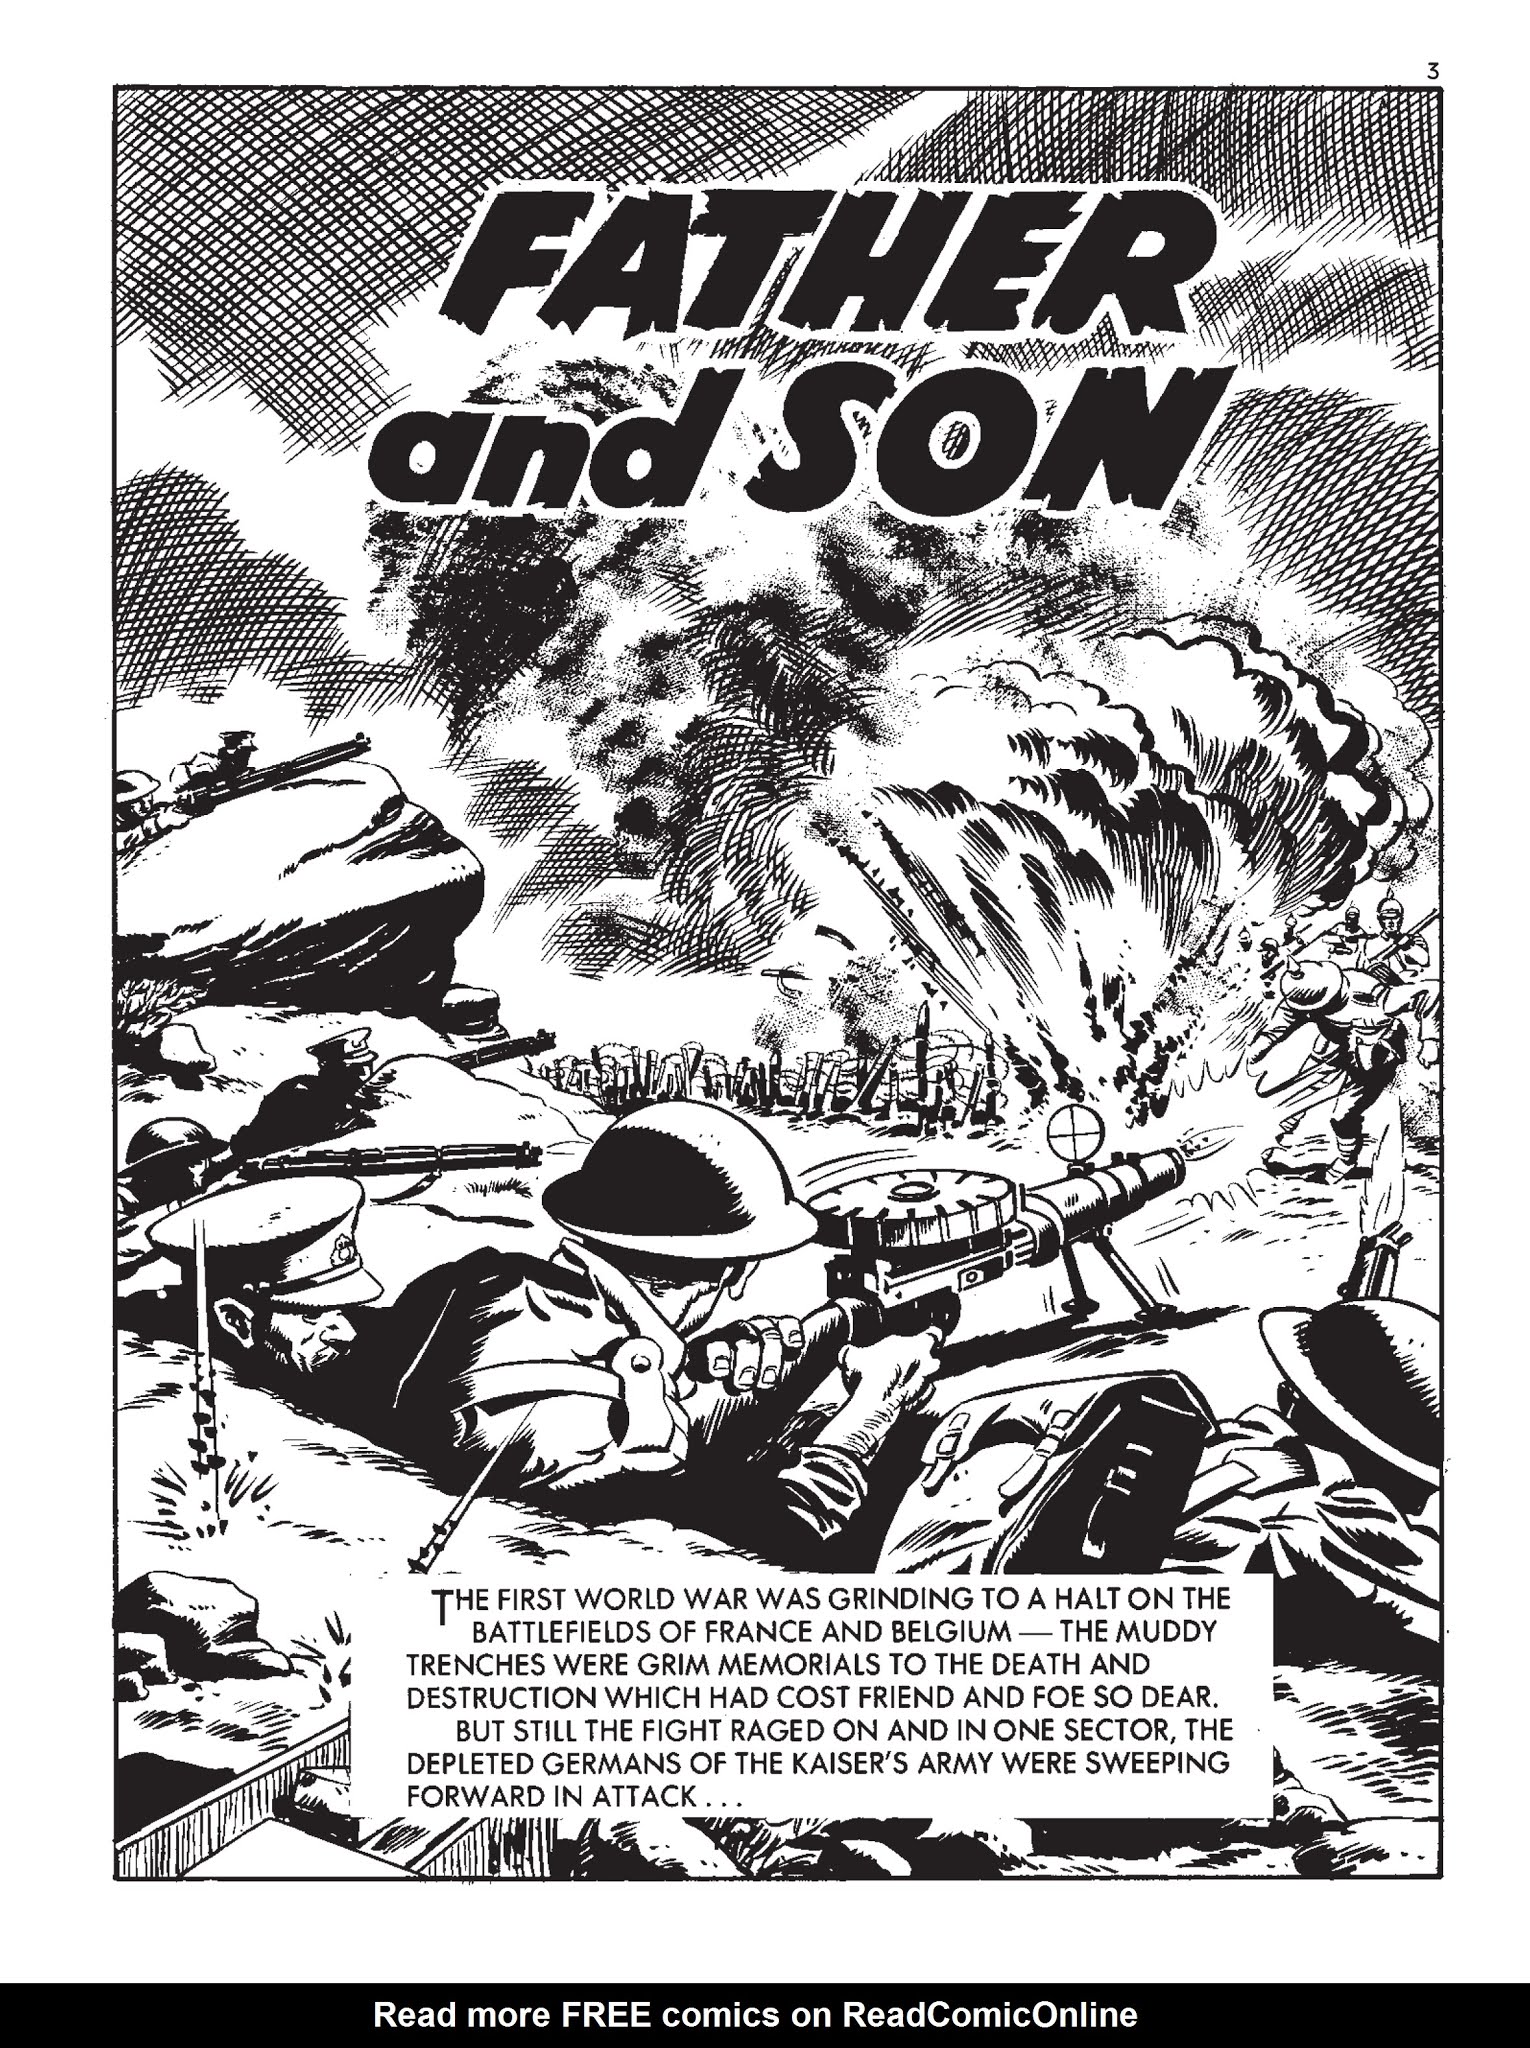 Read online Commando: For Action and Adventure comic -  Issue #5180 - 3